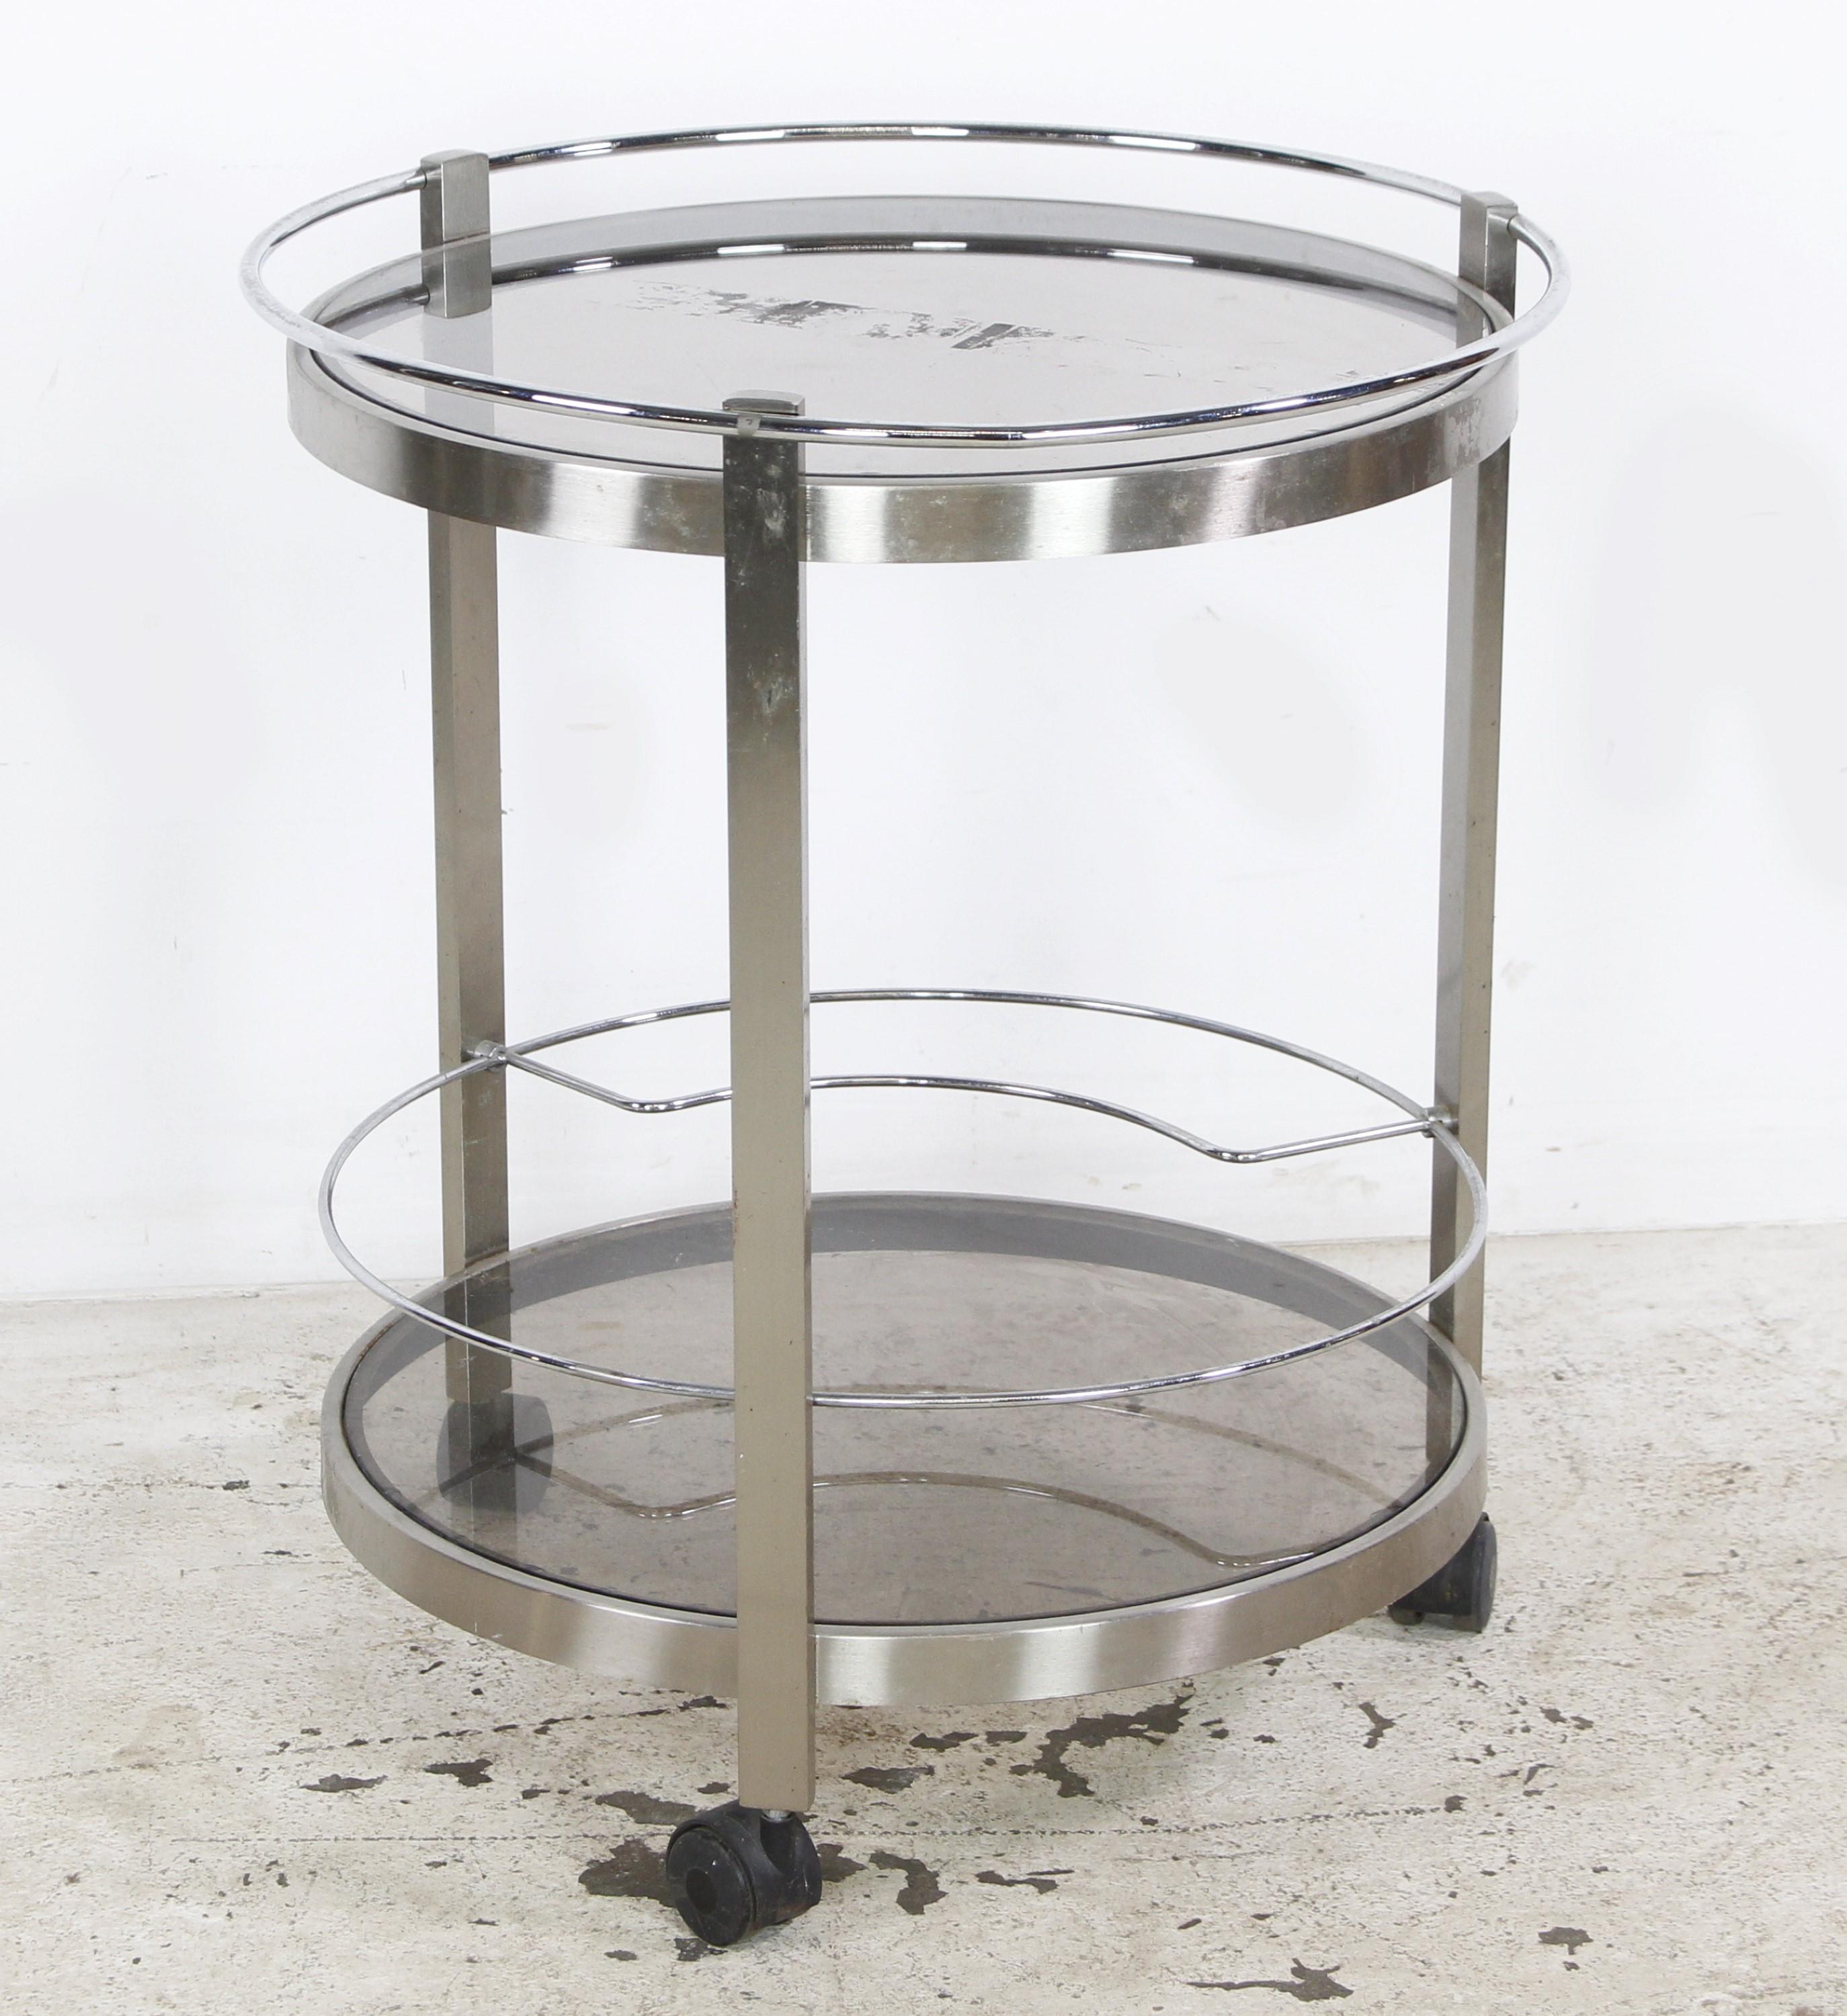 20th Century European Nickeled Steel Round Tinted Glass Bar Cart For Sale